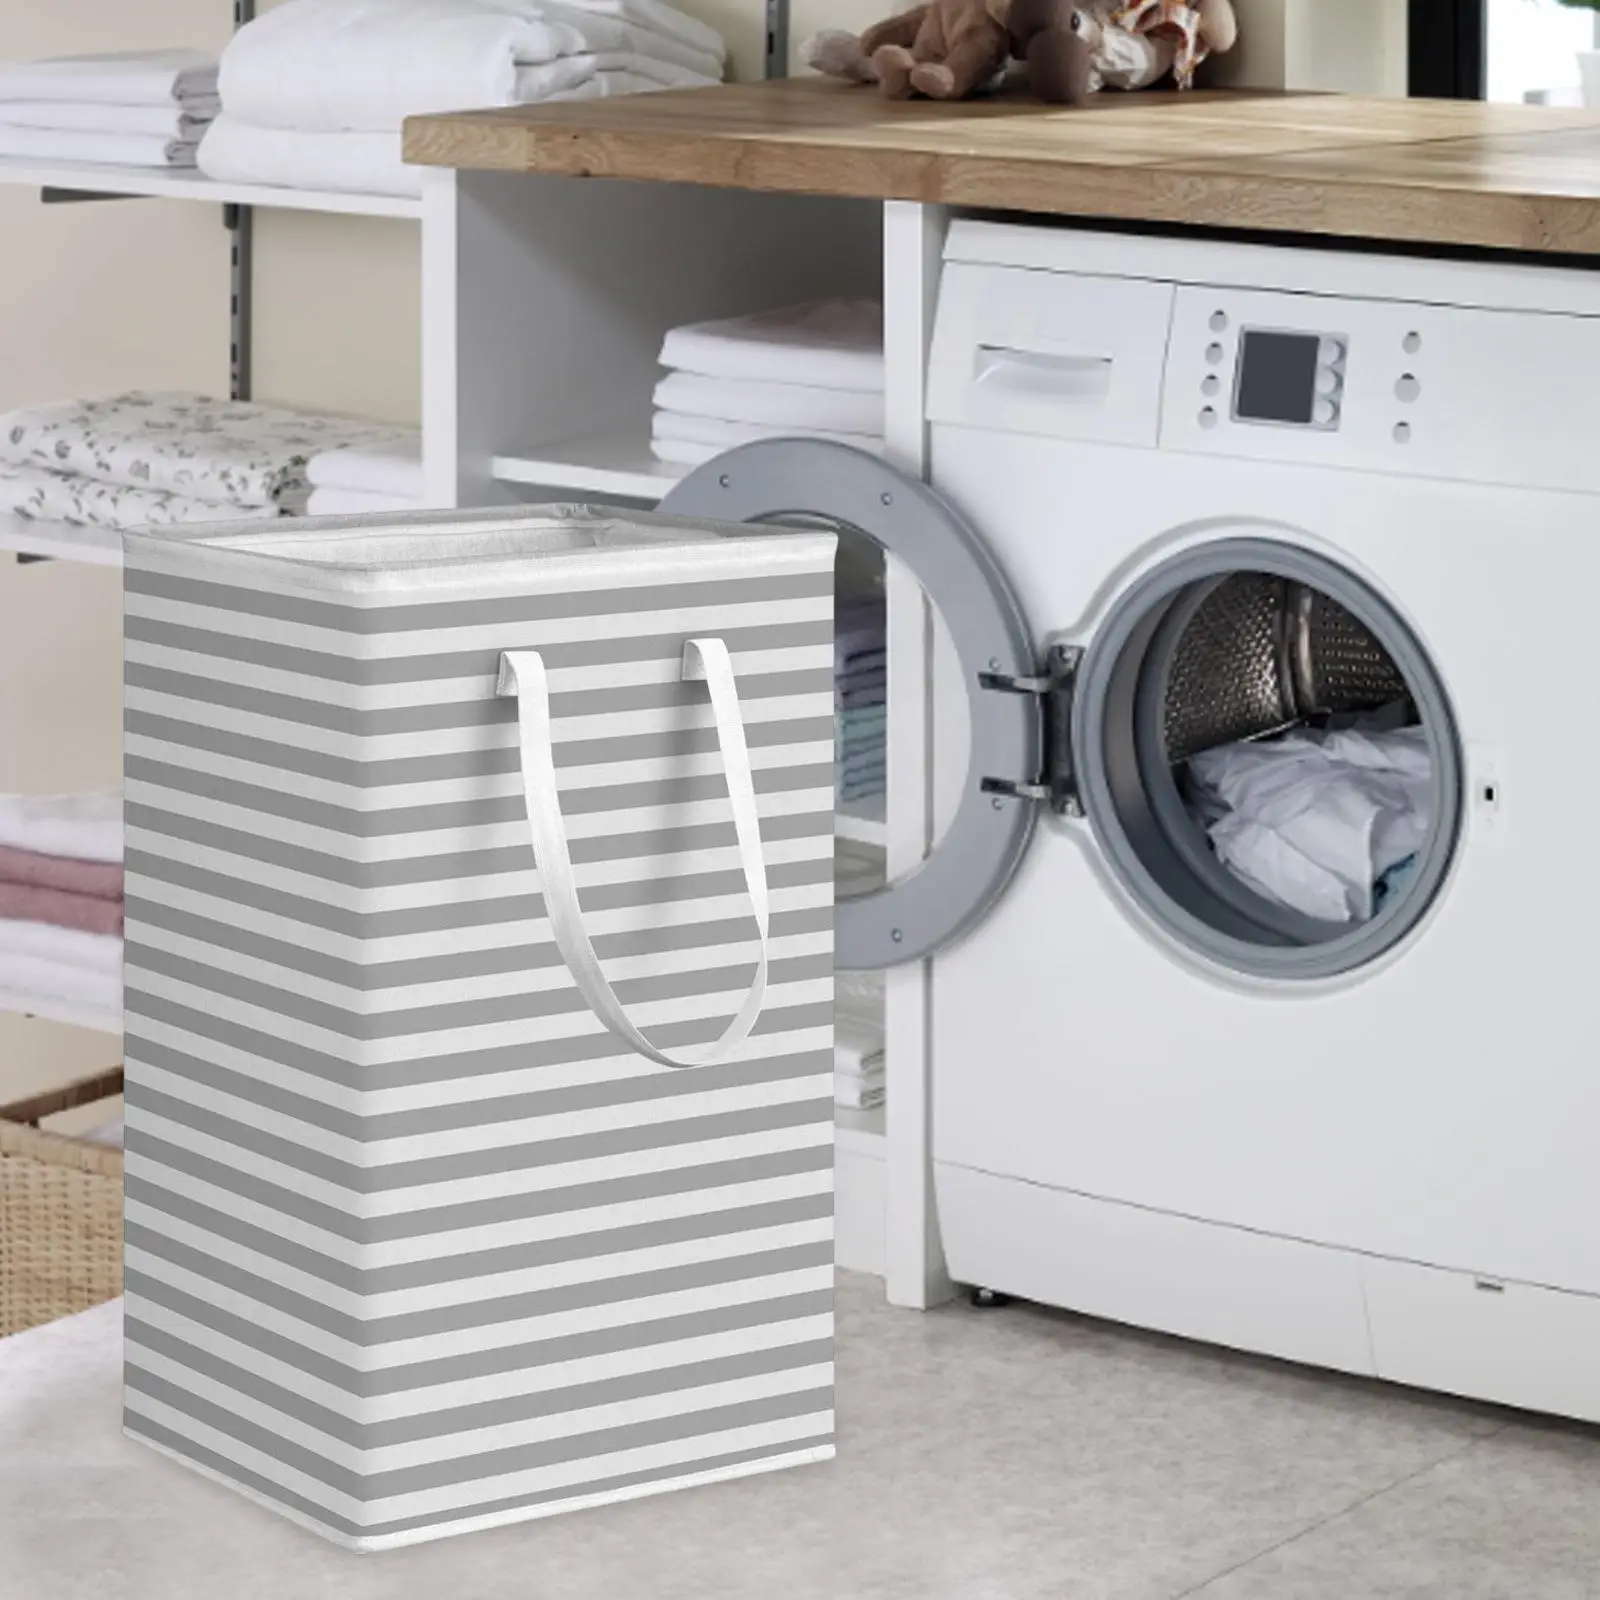 Laundry Hamper Toys Clothes Organizer with Handles Washing Bin Clothes Hamper Storage Basket for Apartments Hotel Dorm Bedroom